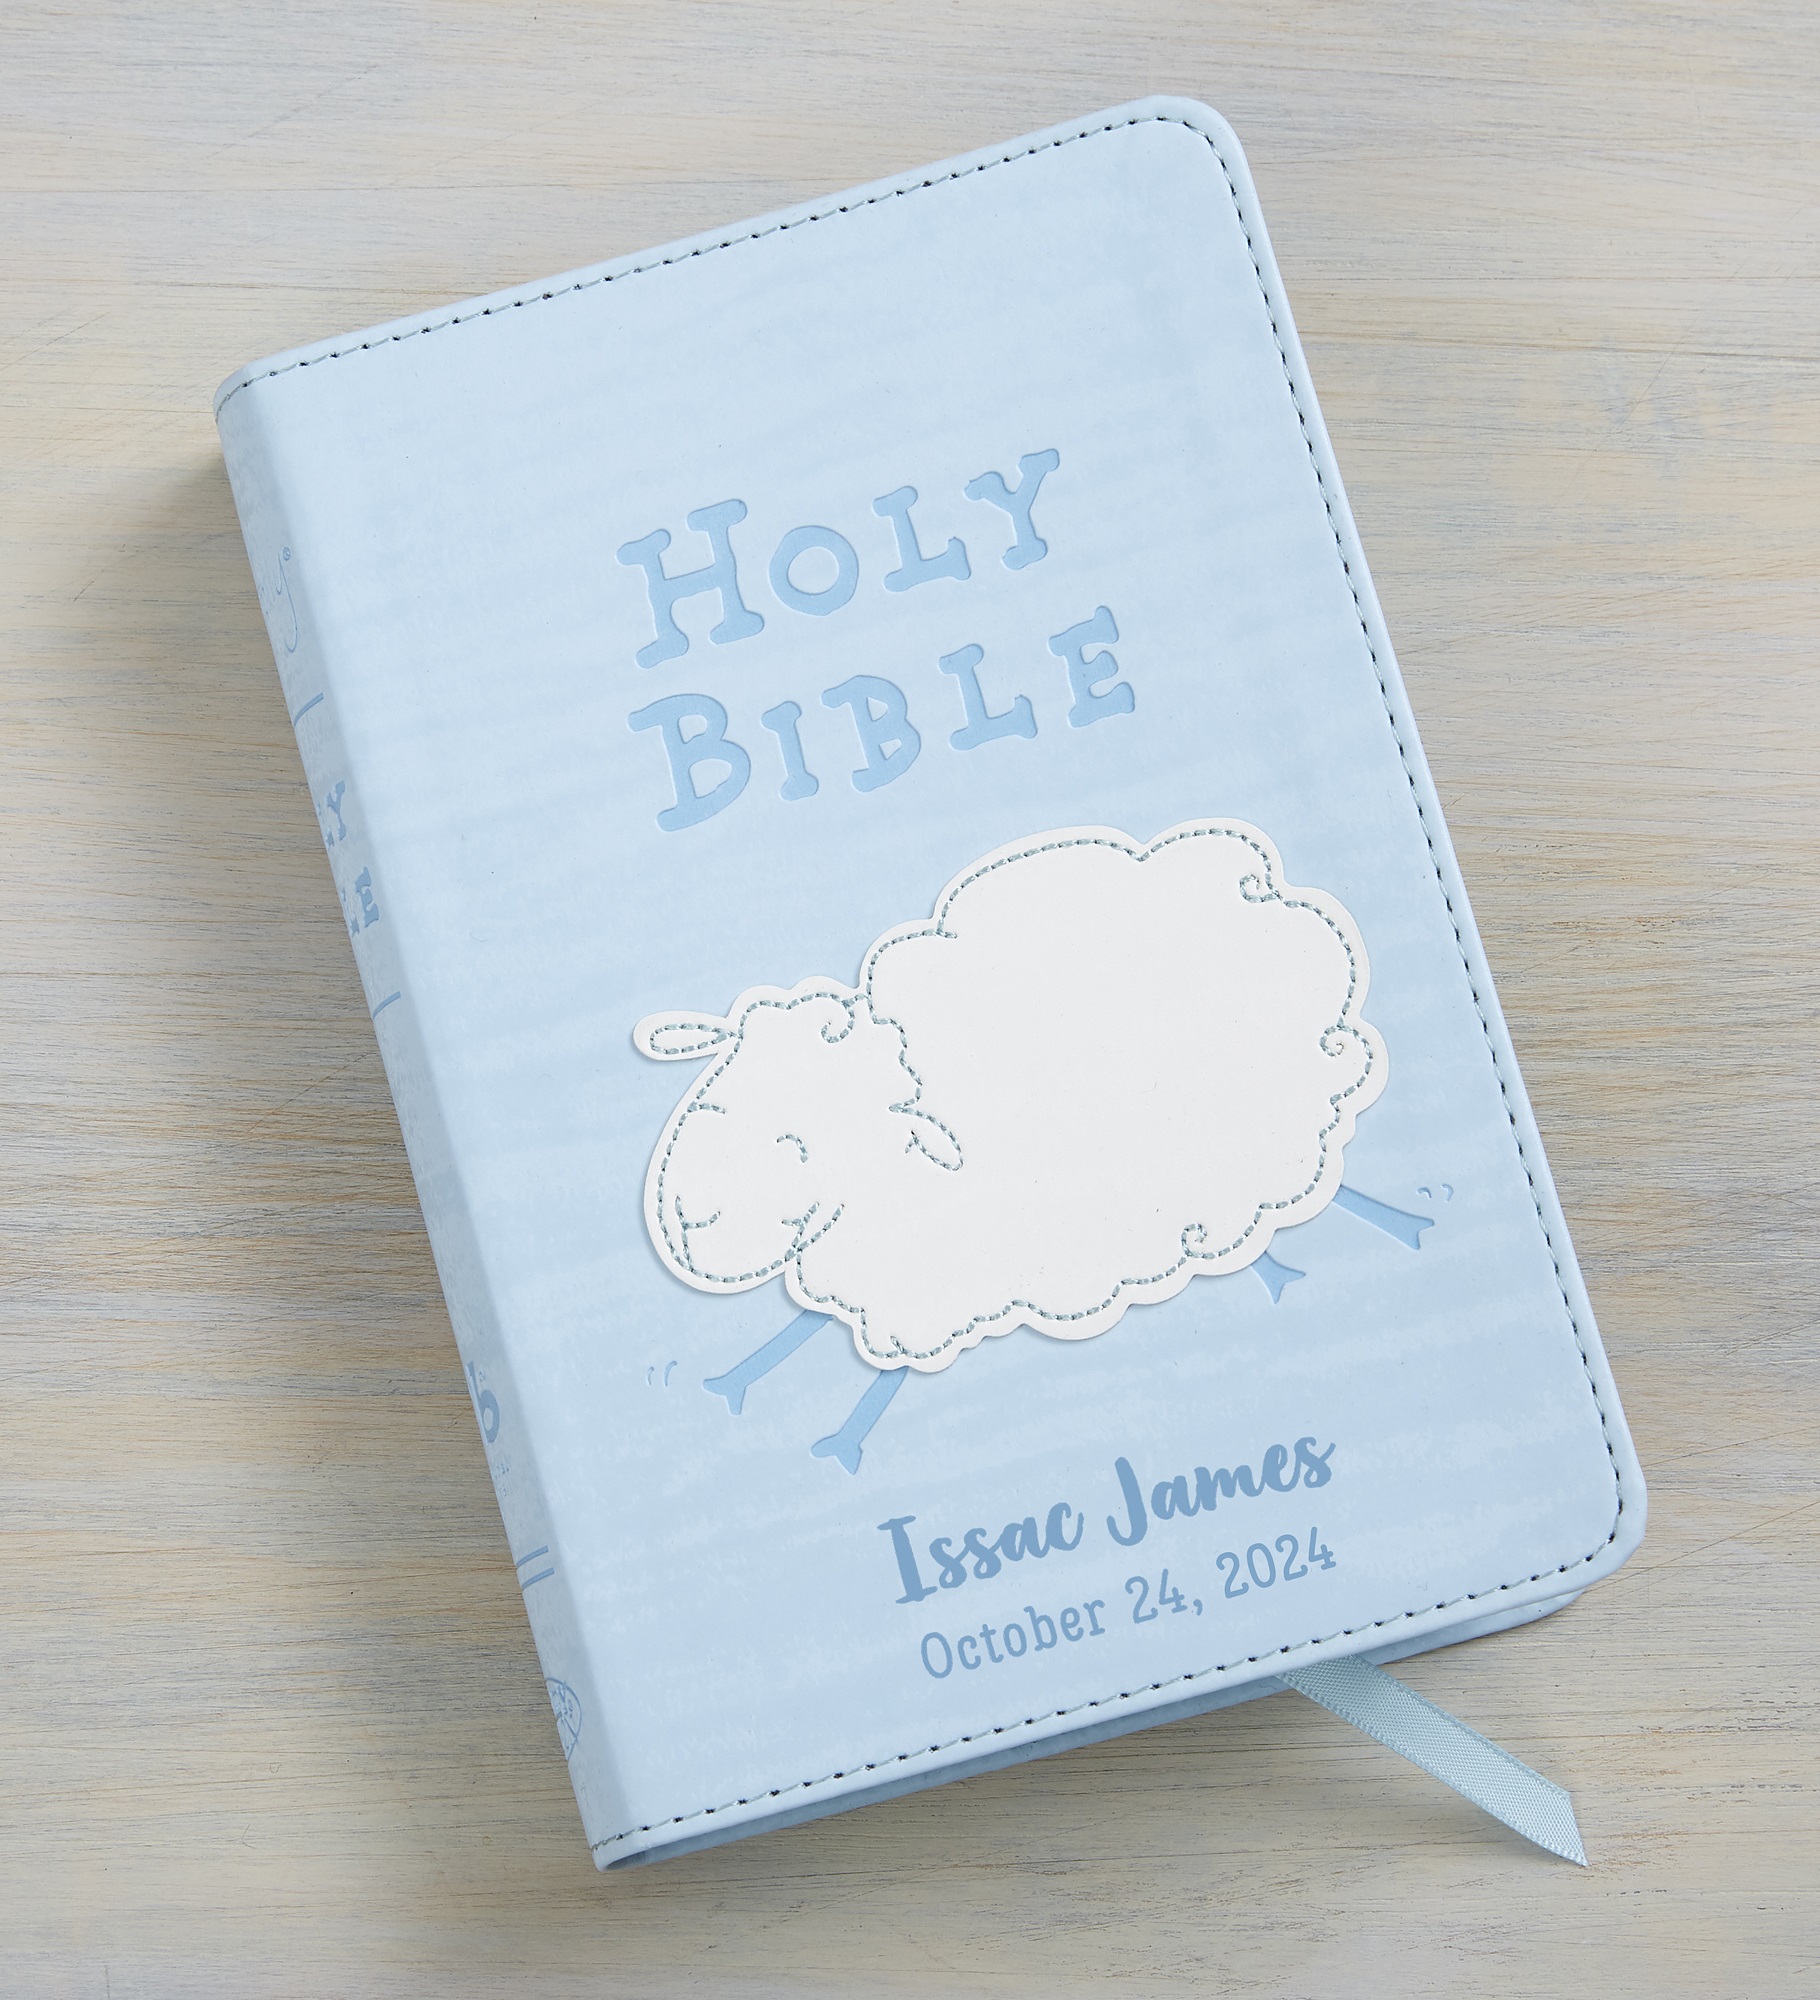 Woolly Lamb Personalized Children's Bible